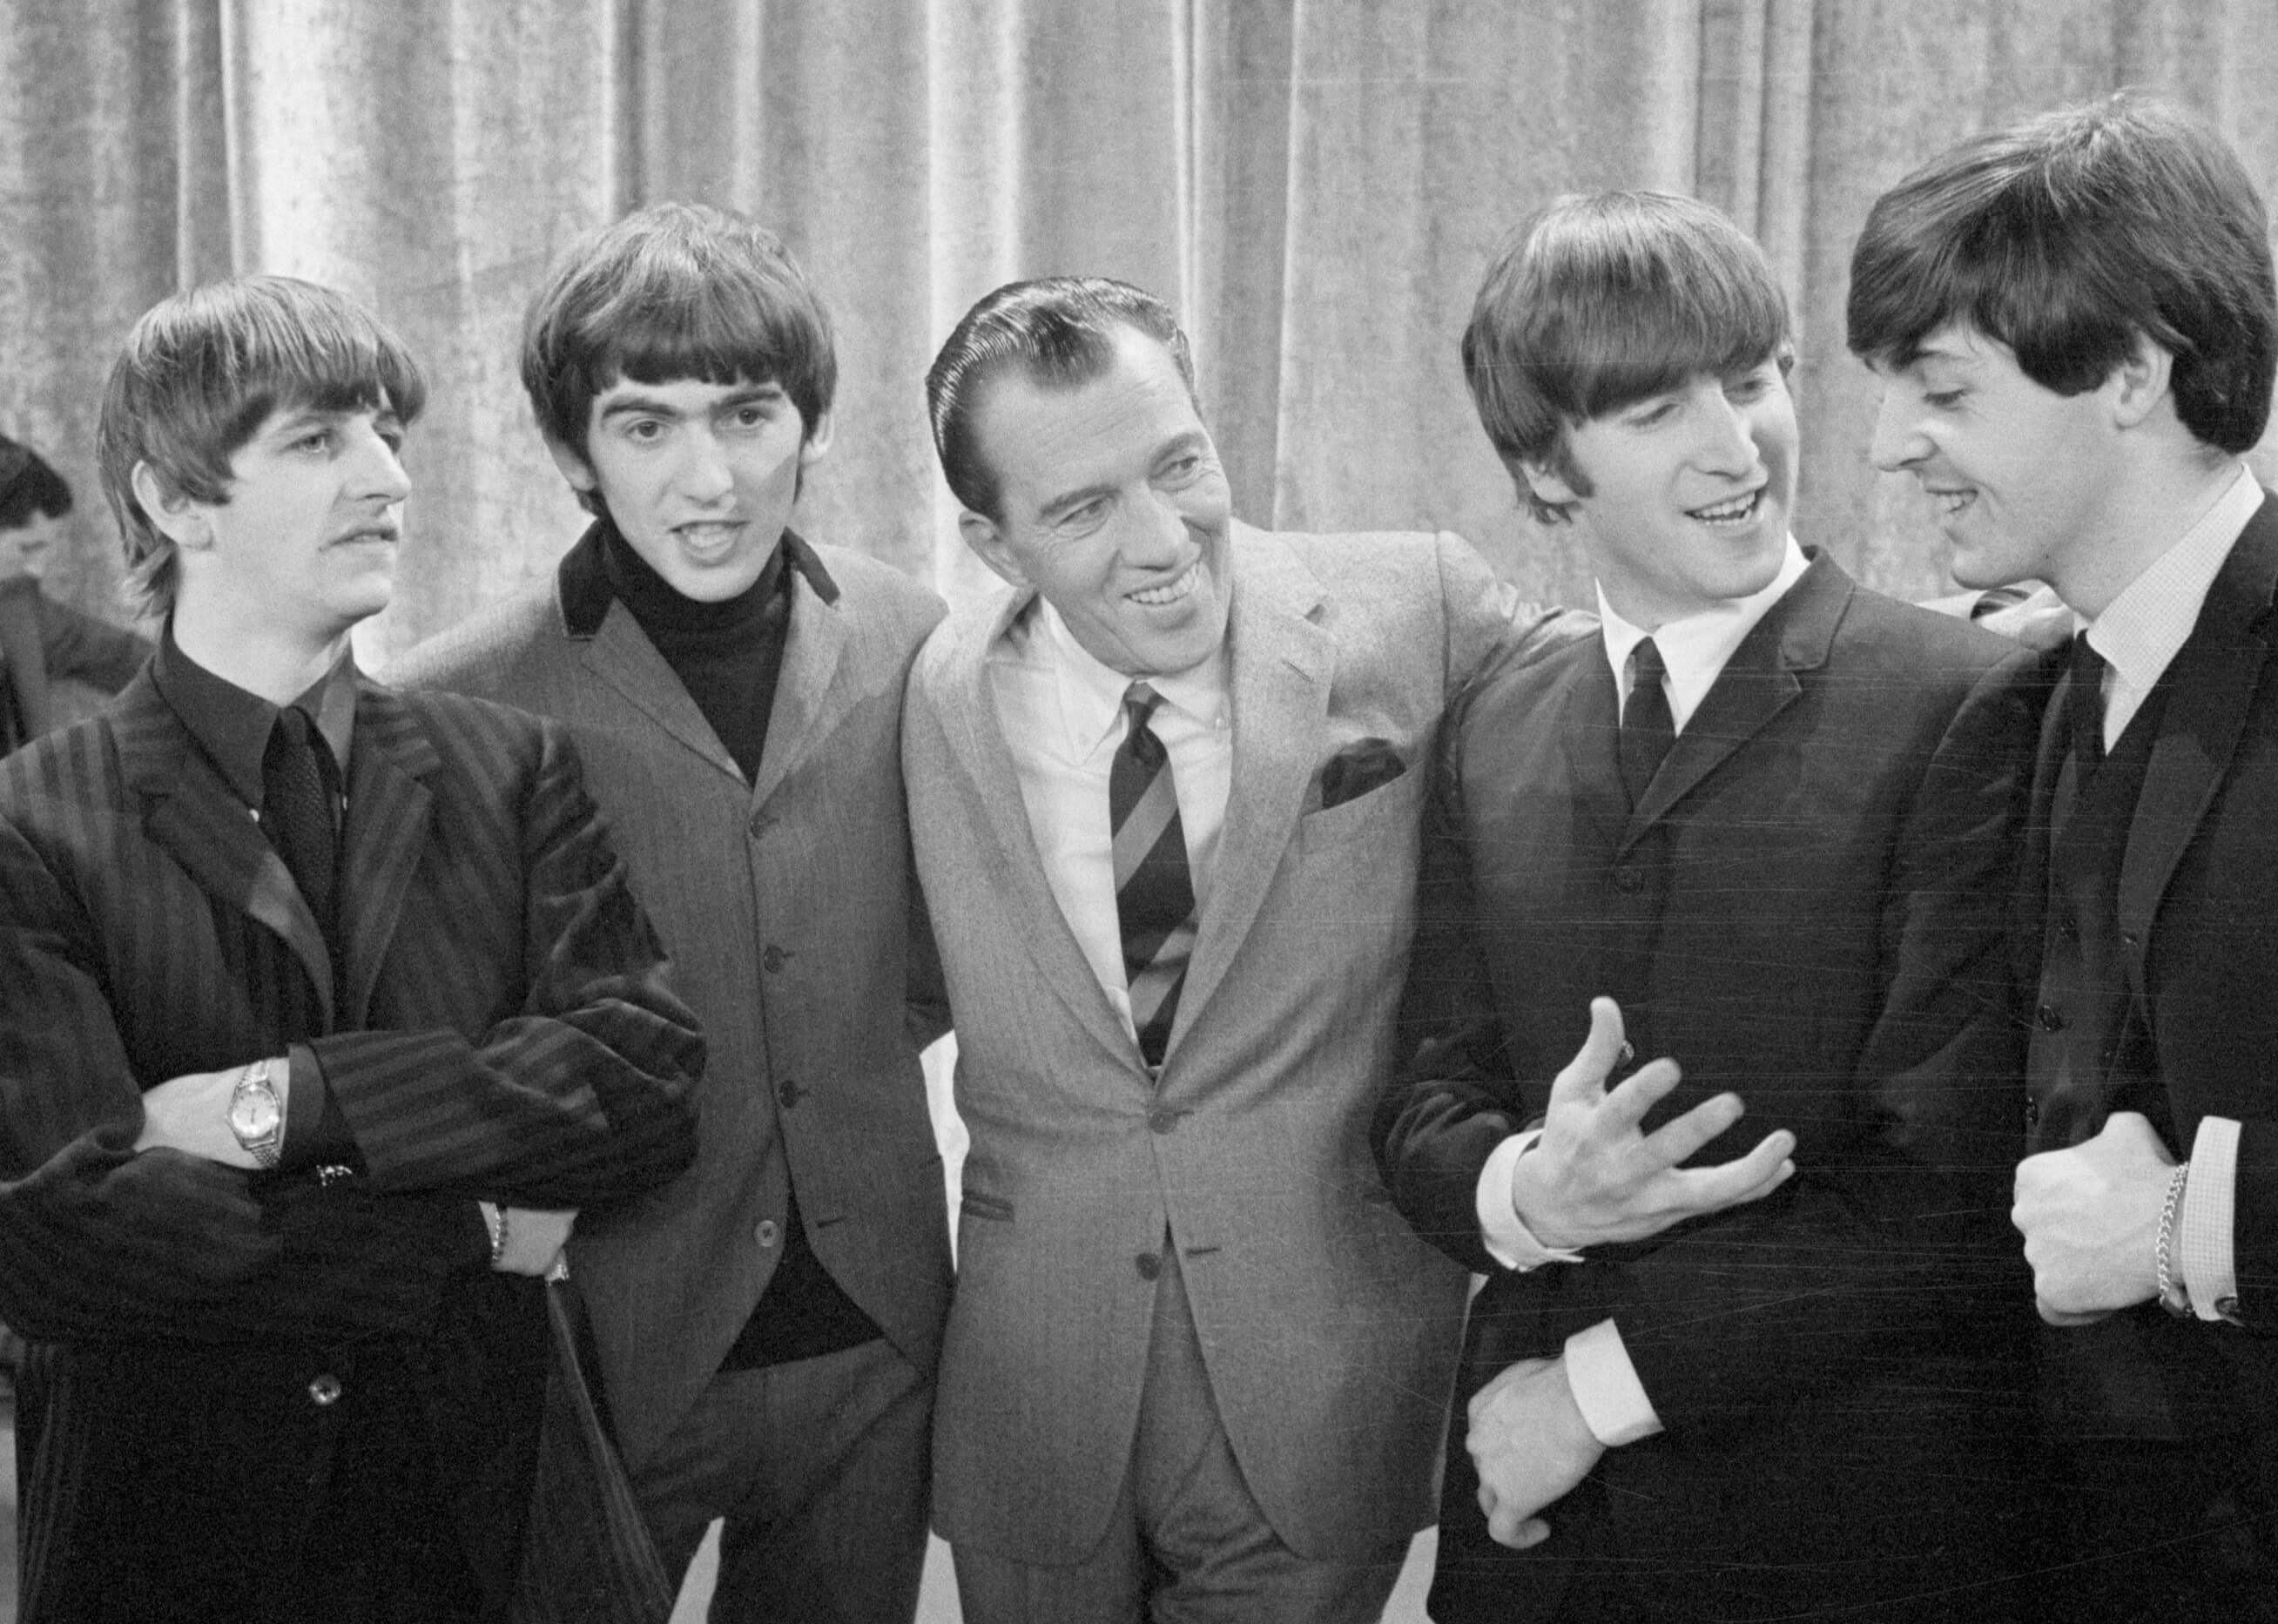 The Beatles and Ed Sullivan in black-and-white